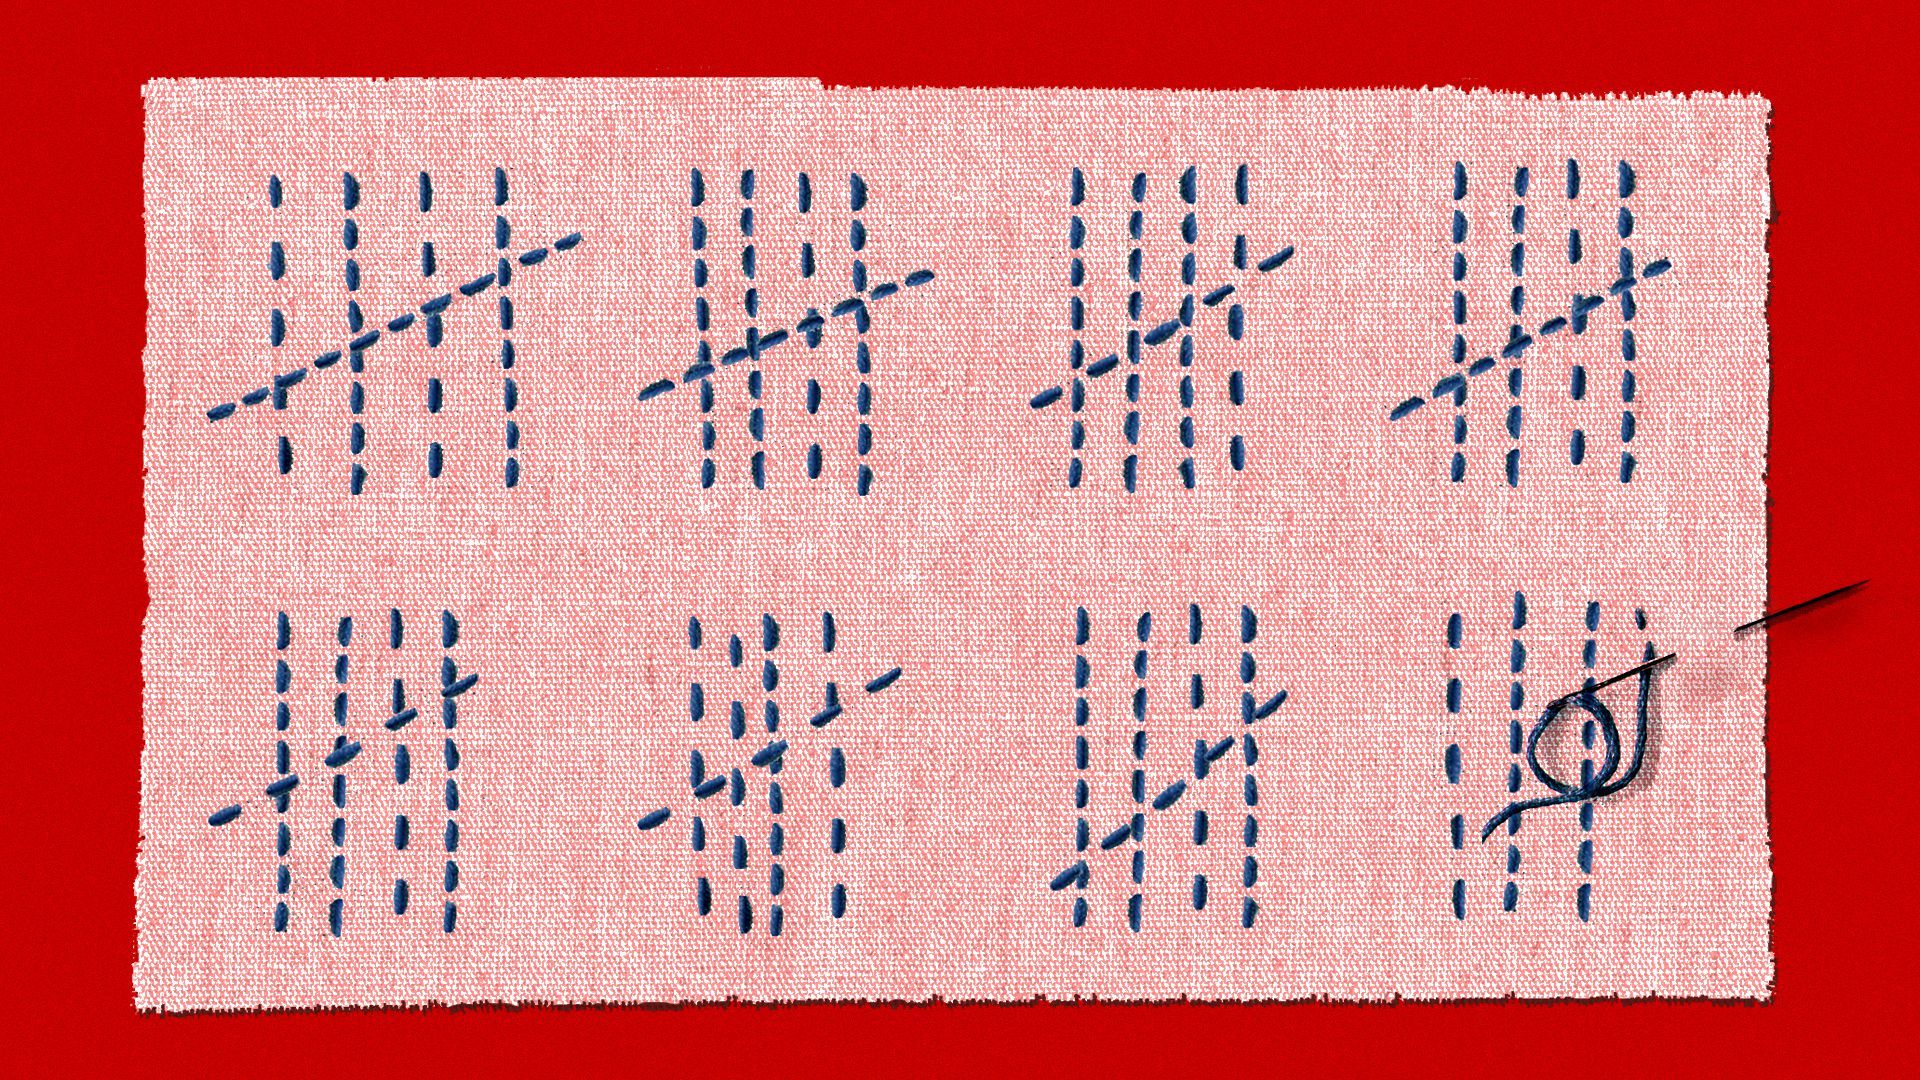 Illustration of a piece of cloth with stitching in the shape of tally marks marking off days